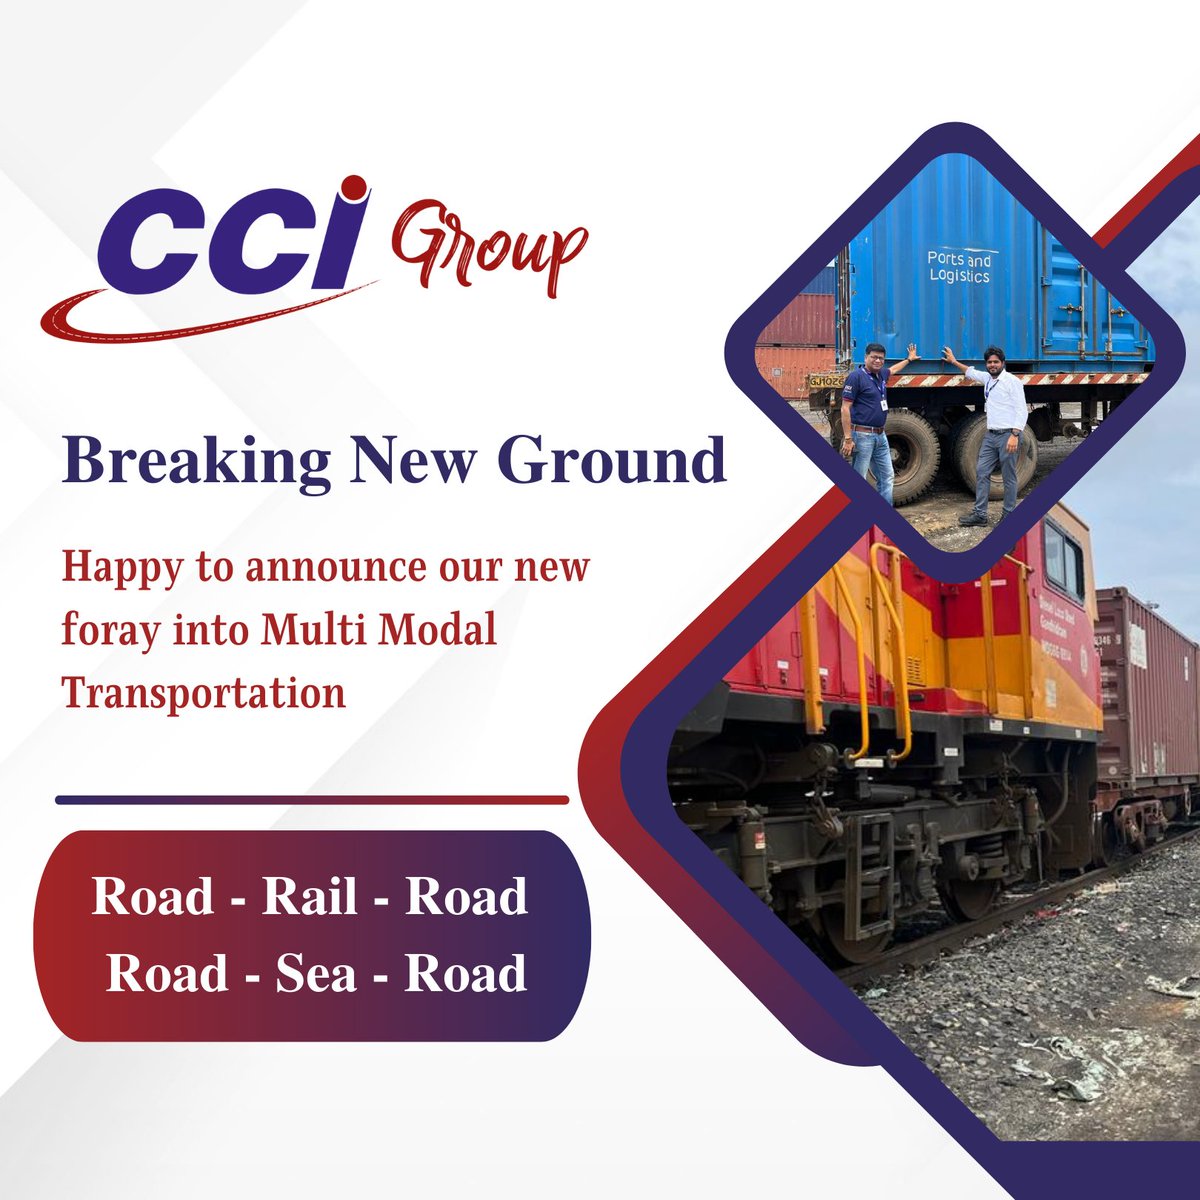 CCI Group Expands its Horizons ! We are thrilled to announce our foray into Multi Modal Transportation services
#multimodaltransportation #multimodal2023 #logisticsmanagement #transportationservices #transportdistribution #supplychainlogistics #supplychainlogistics #logistics